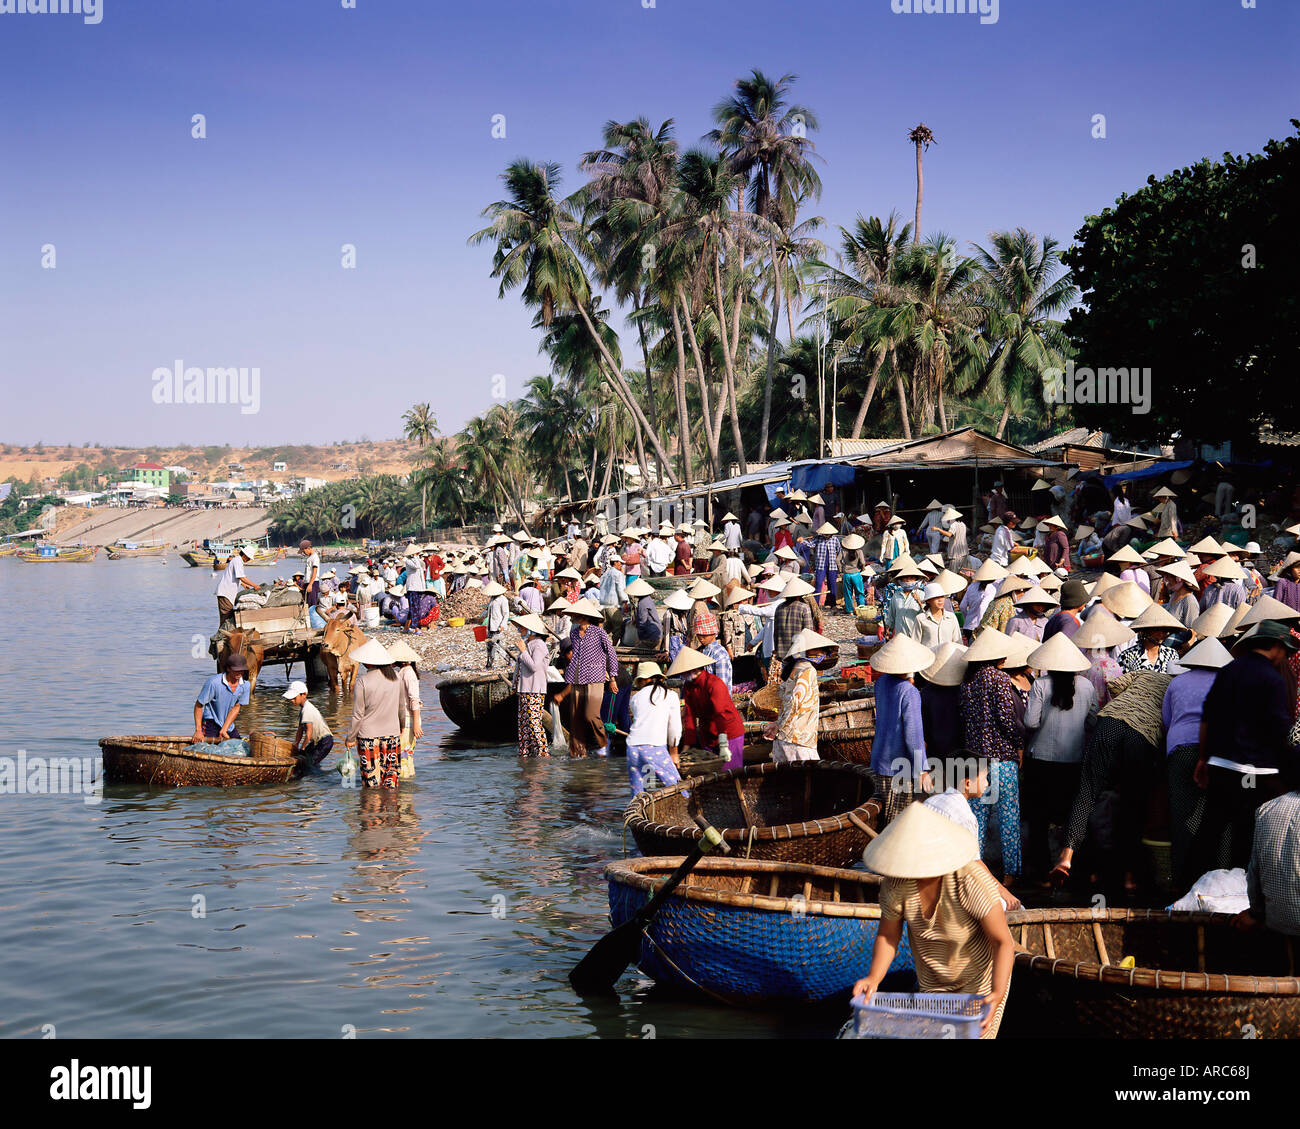 Fishing village people collecting the morning catch, Mui Ne, south-central coast, Vietnam, Indochina, Southeast Asia Stock Photo